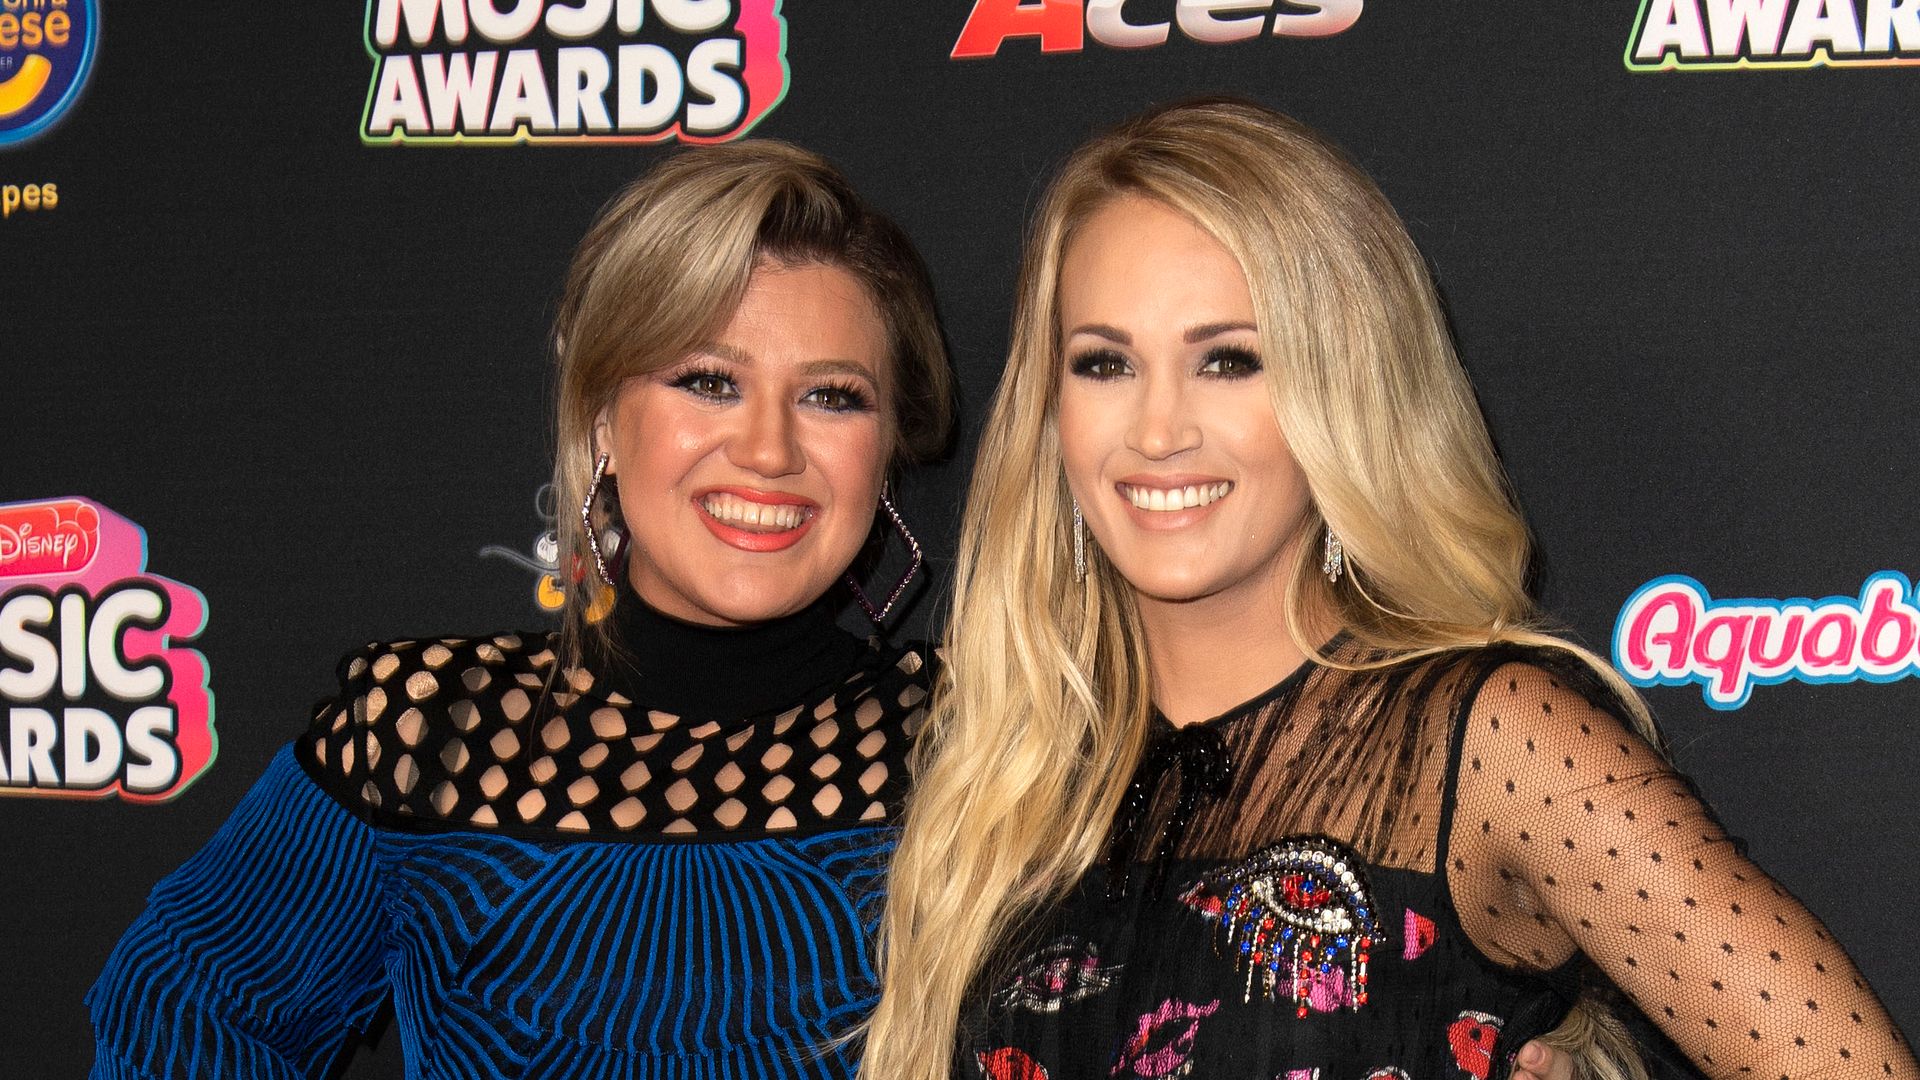 Kelly Clarkson and Carrie Underwood attend the 2018 Radio Disney Music Awards at Loews Hollywood Hotel on June 12, 2018 in Hollywood, California